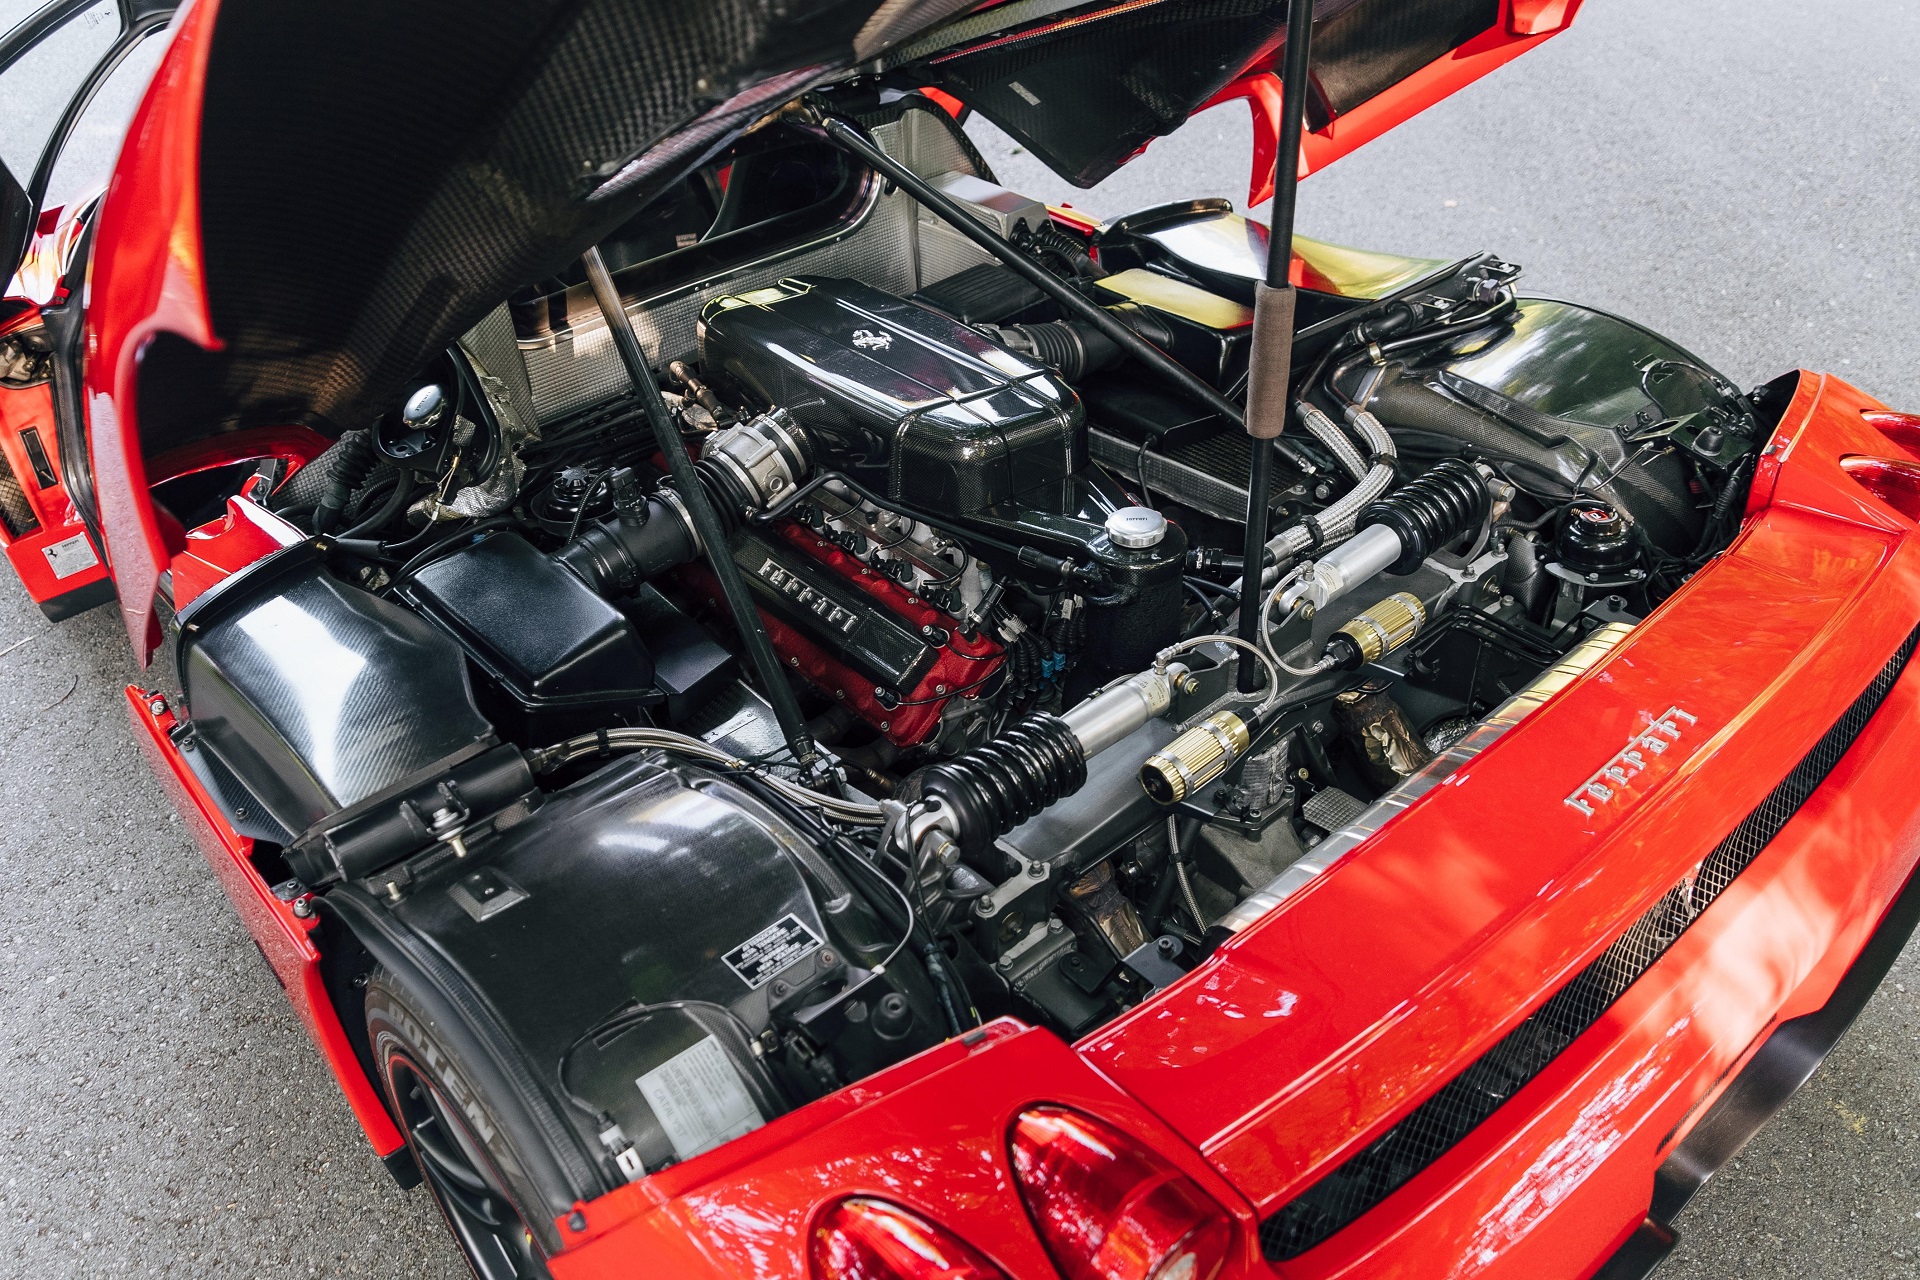 Engine bay view of the red 2003 Ferrari Enzo